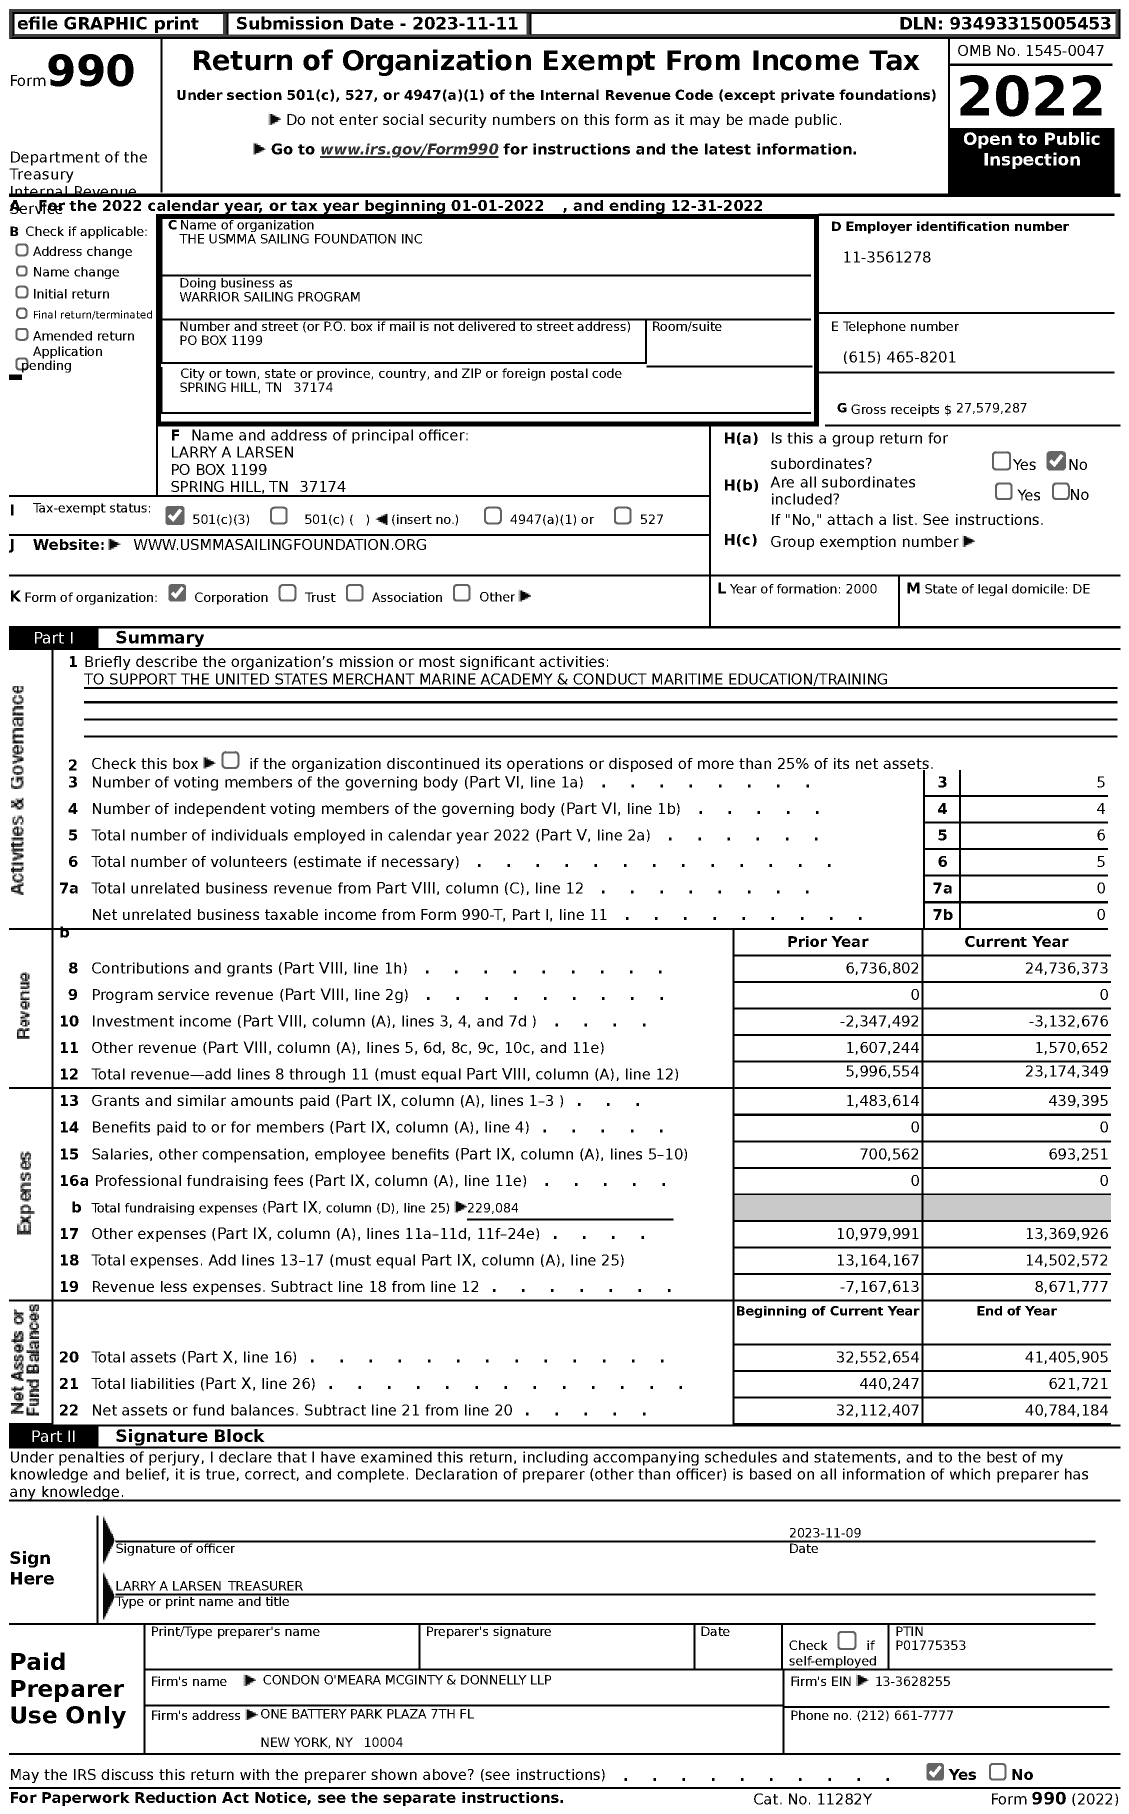 Image of first page of 2022 Form 990 for Warrior Sailing Program